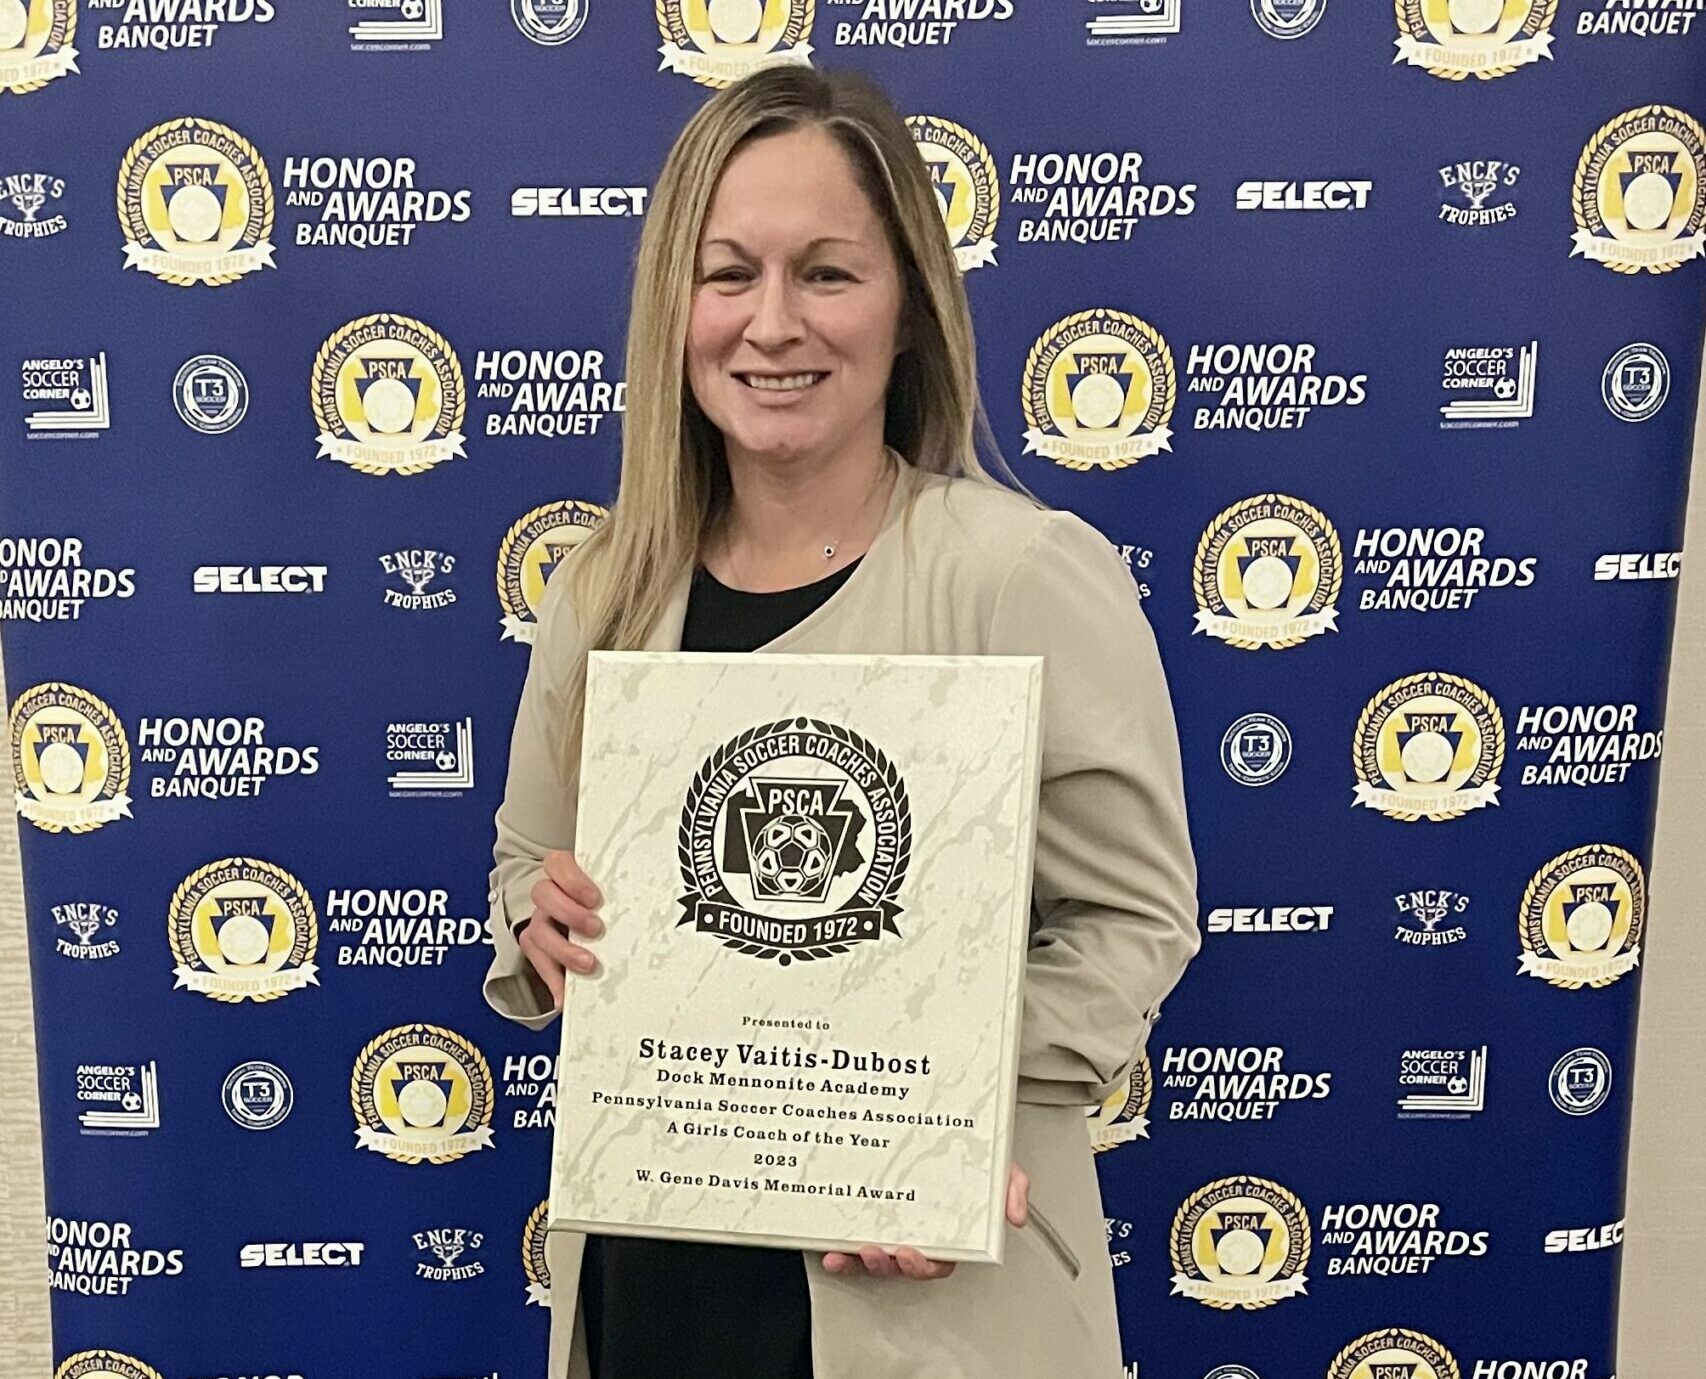 Stacey Vaitis-Dubost Named PSCA "Coach of the Year"